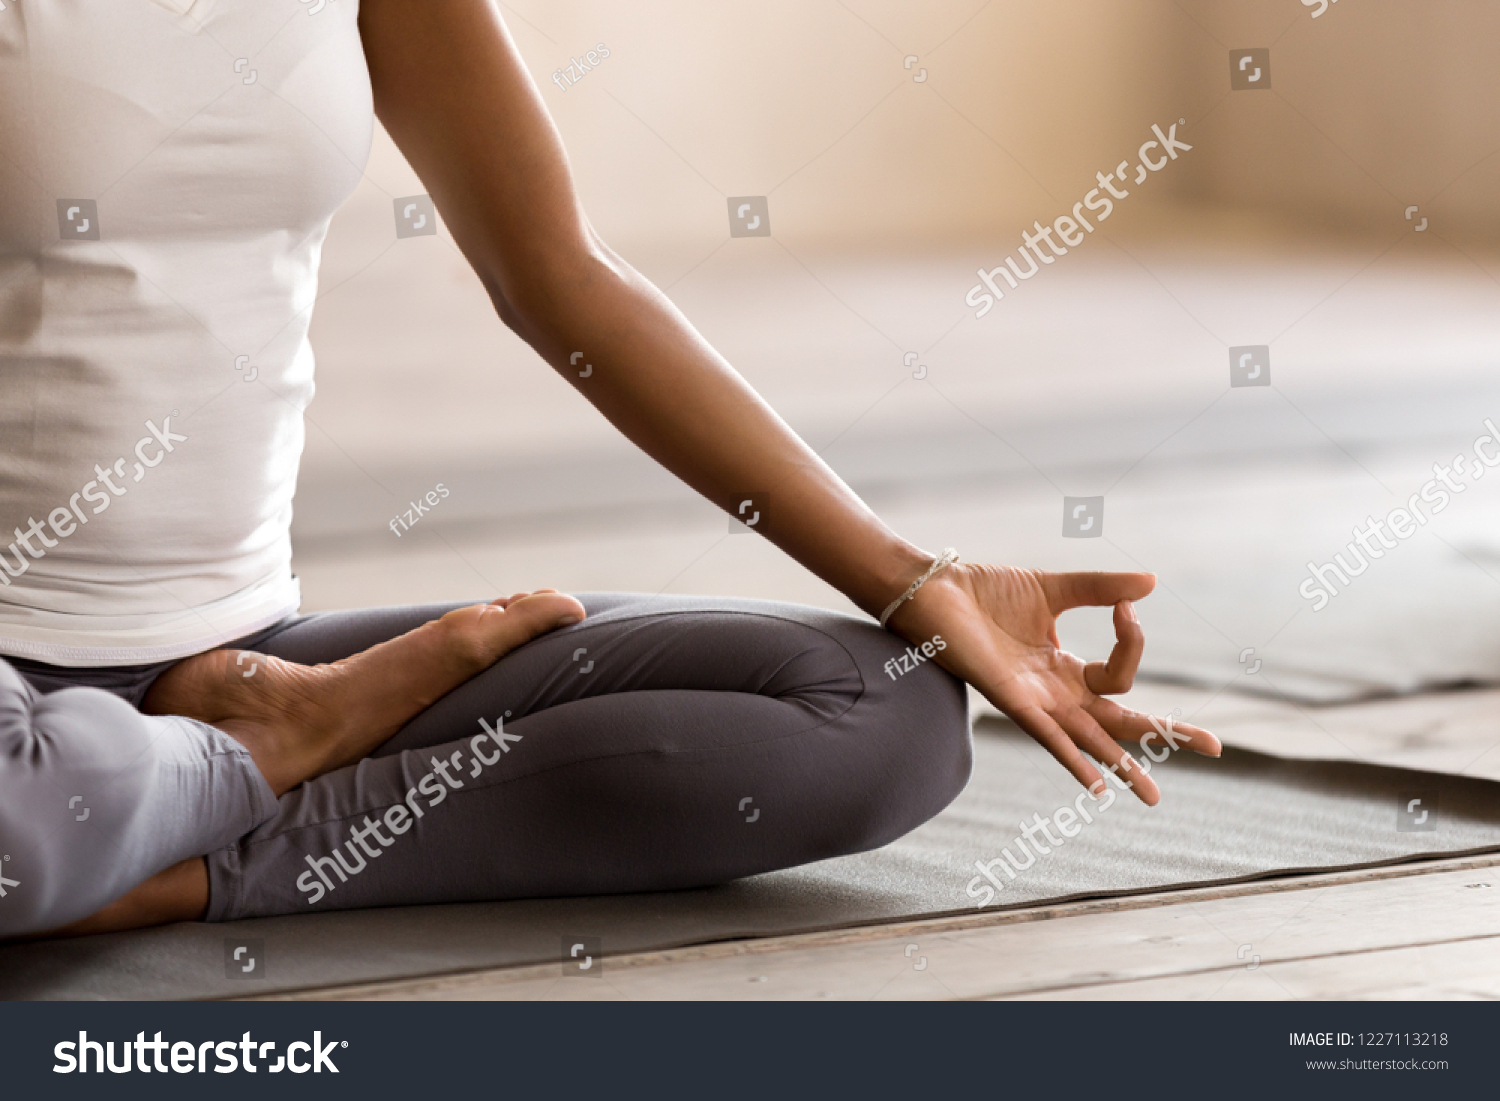 Yogi black woman practicing yoga lesson, breathing, meditating, doing Ardha Padmasana exercise, Half Lotus pose with mudra gesture, working out, indoor close up. Well being, wellness concept #1227113218